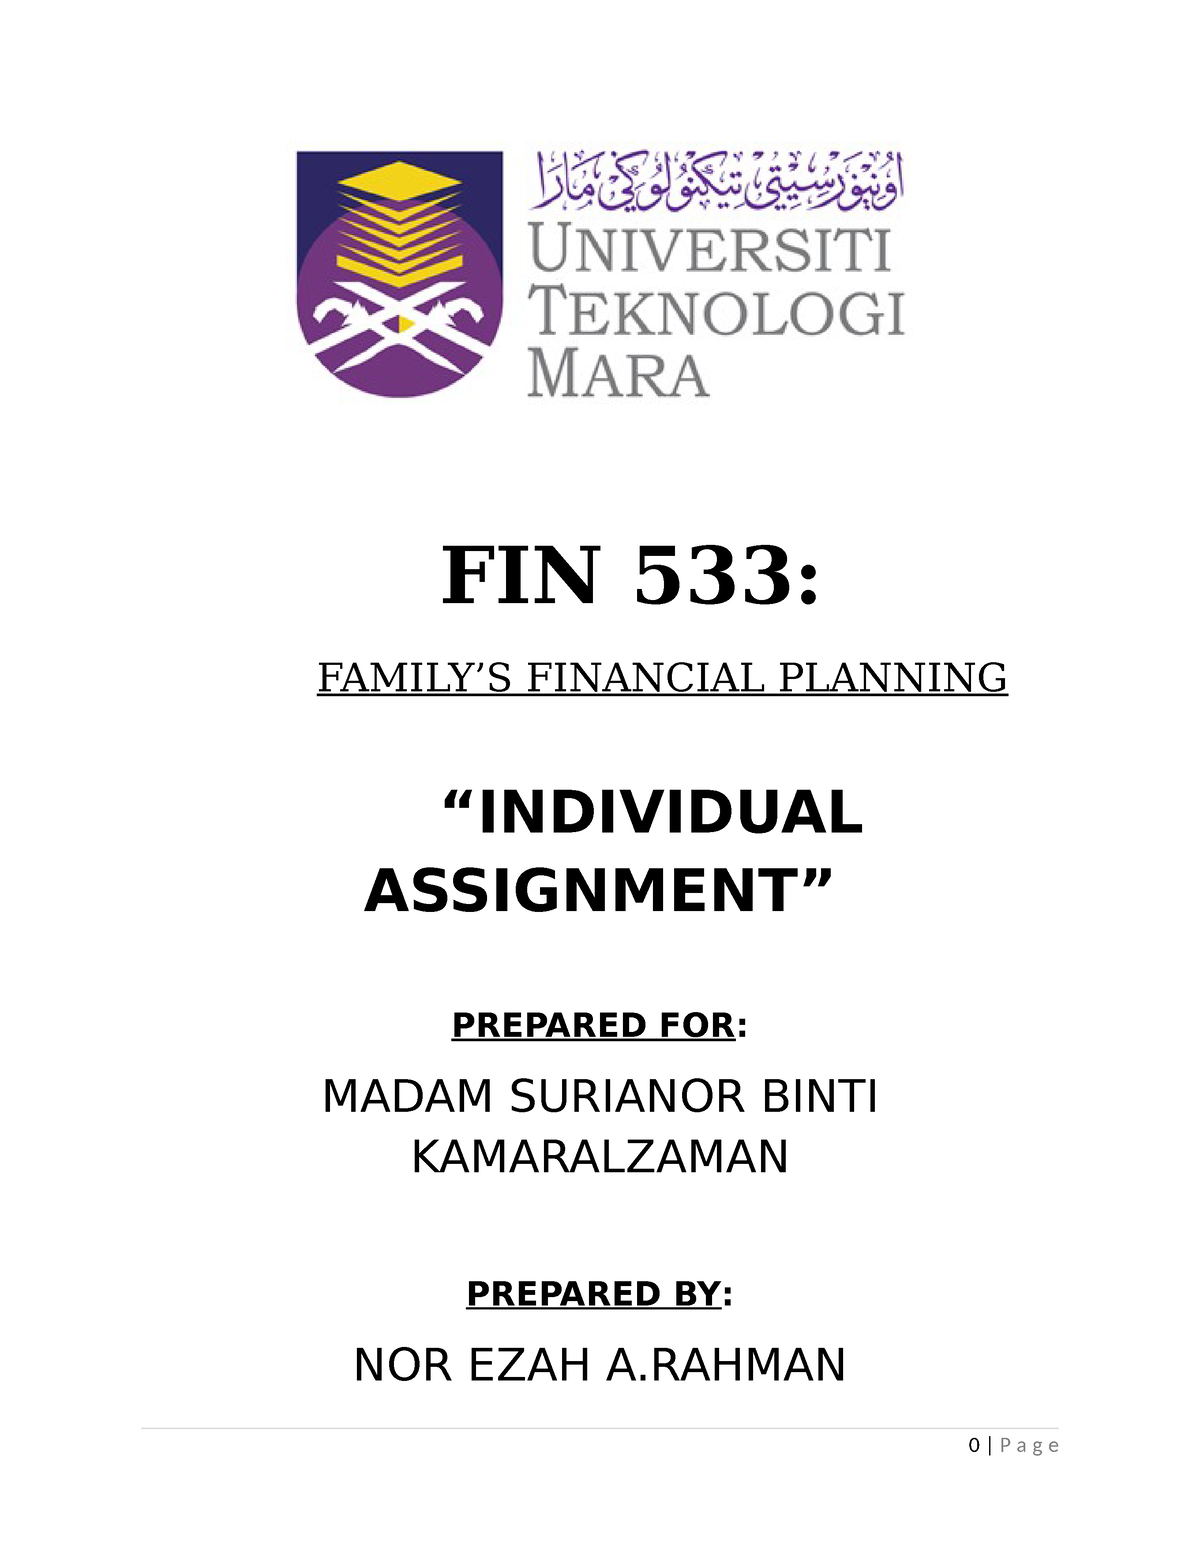 fin 533 personal financial planning assignment